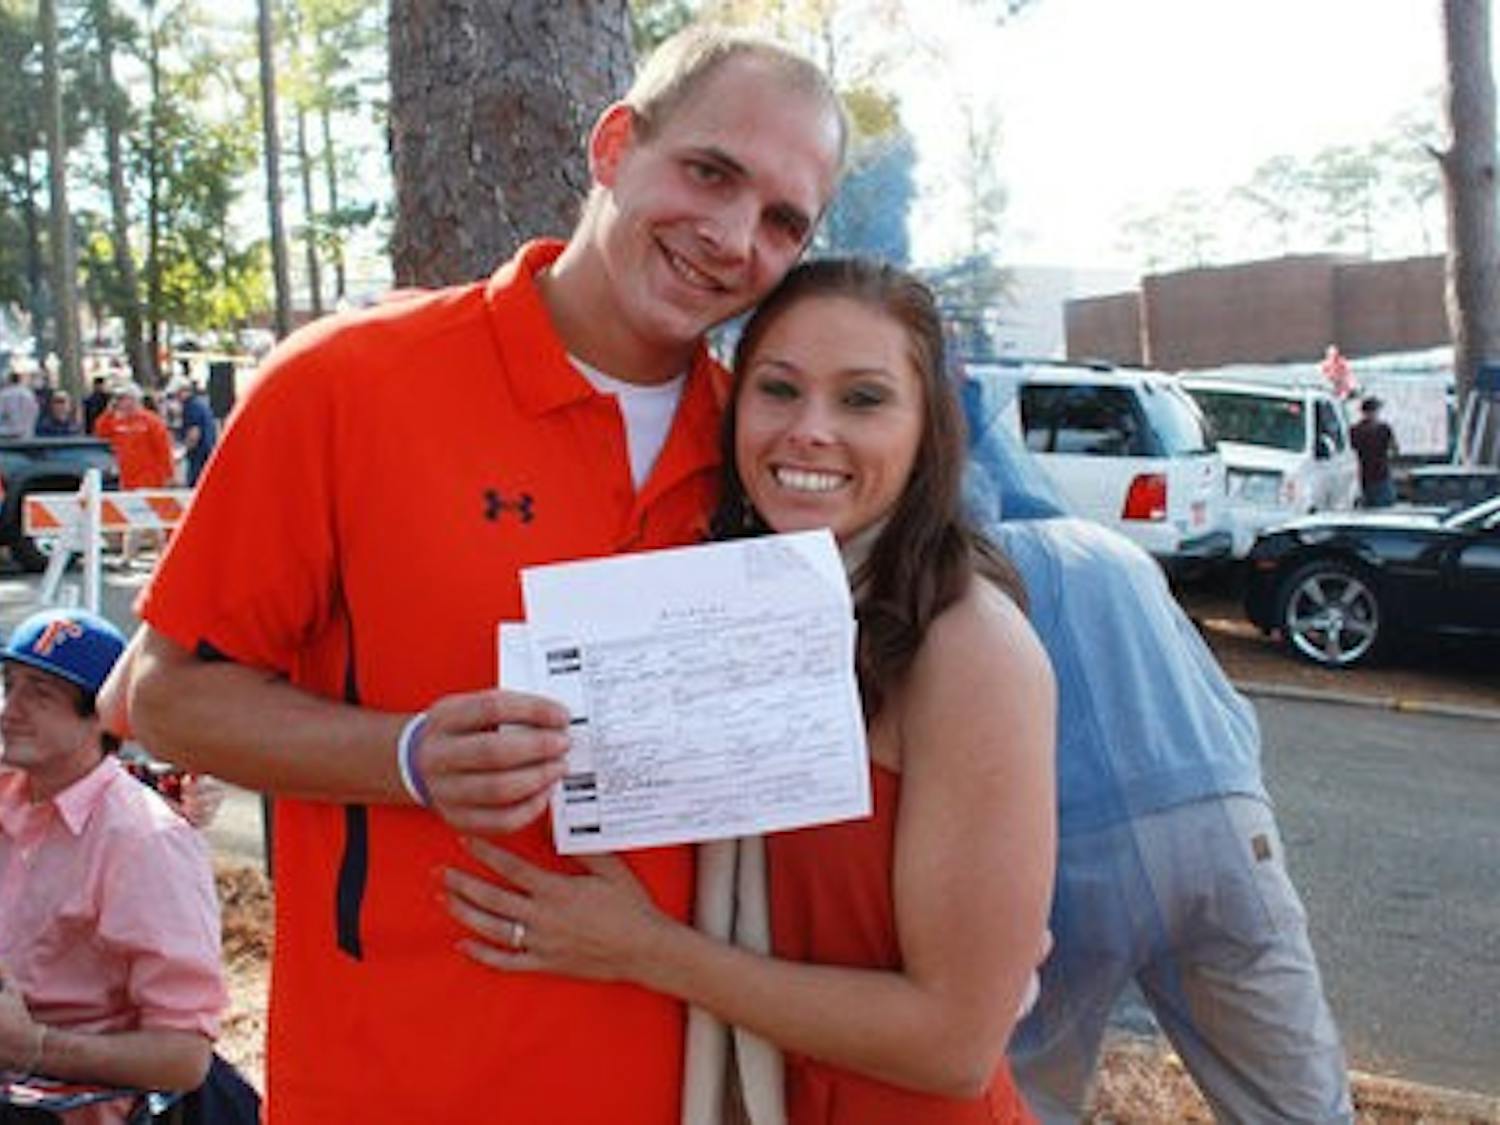 James and Kelly show off their marriage license. (Emily Adams/PHOTO EDITOR)